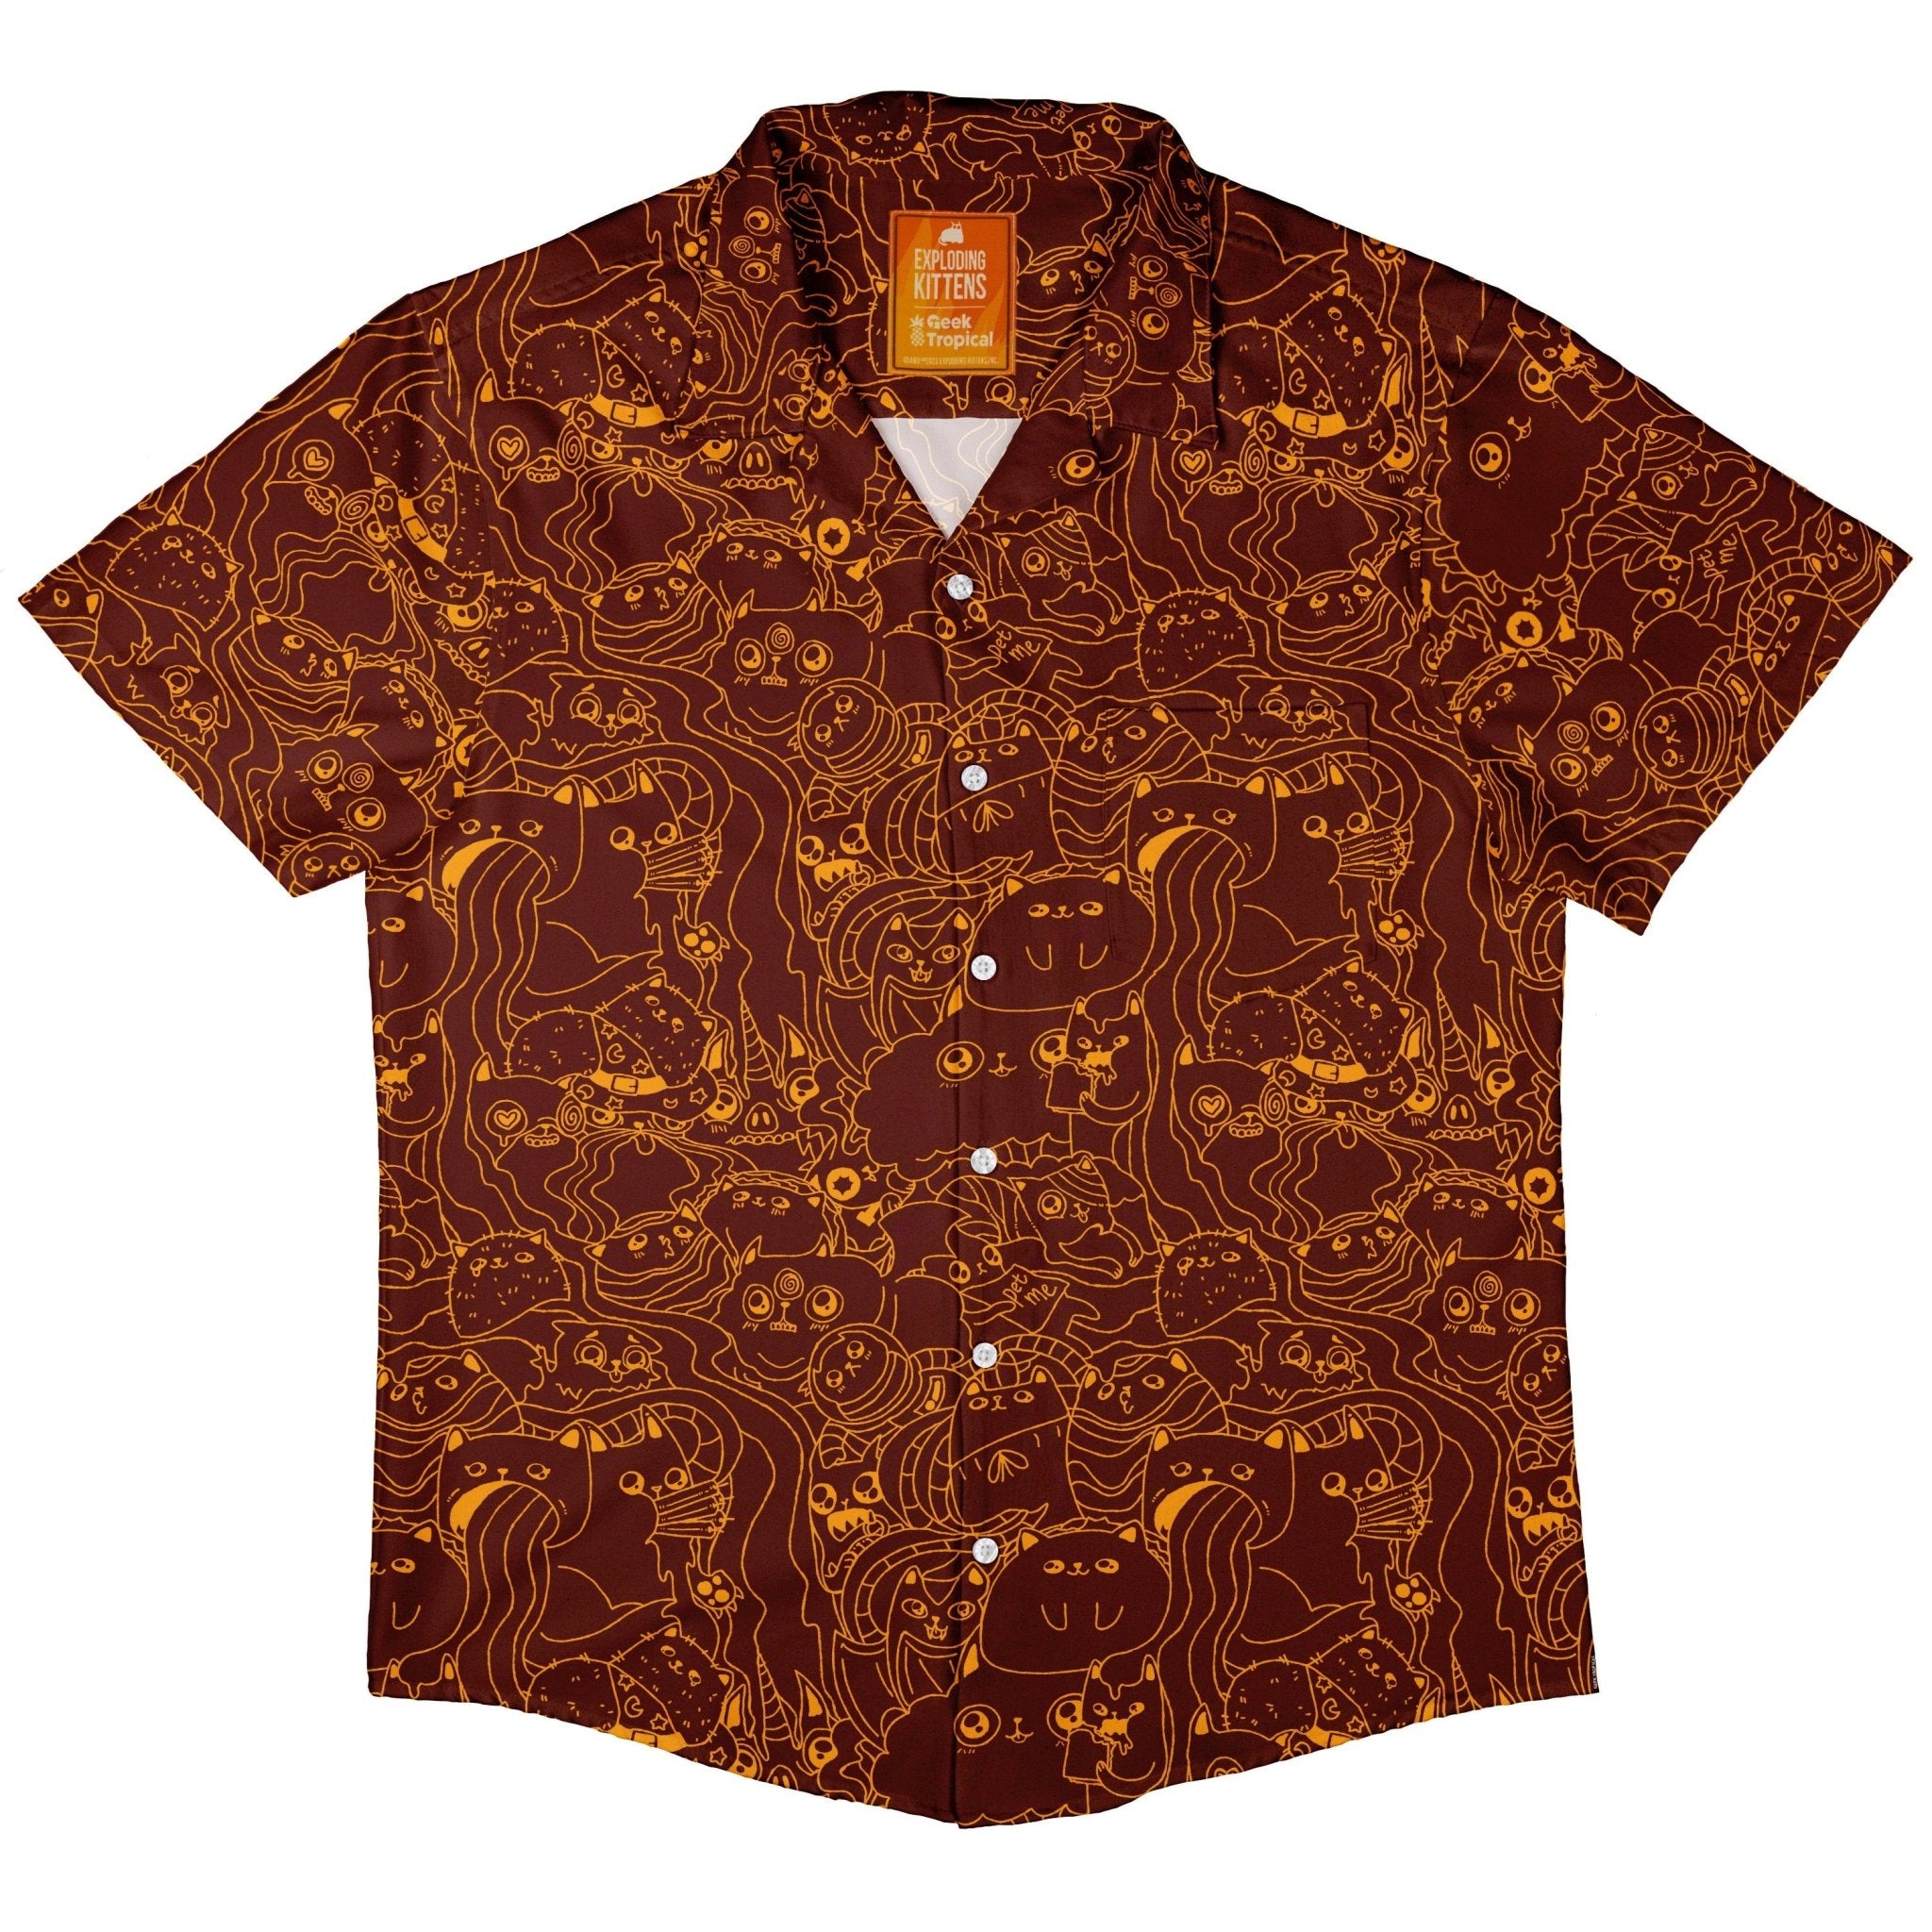 Exploding Kittens Mashup Red Brown Button Up Shirt - adult sizing - Animal Patterns - board game print